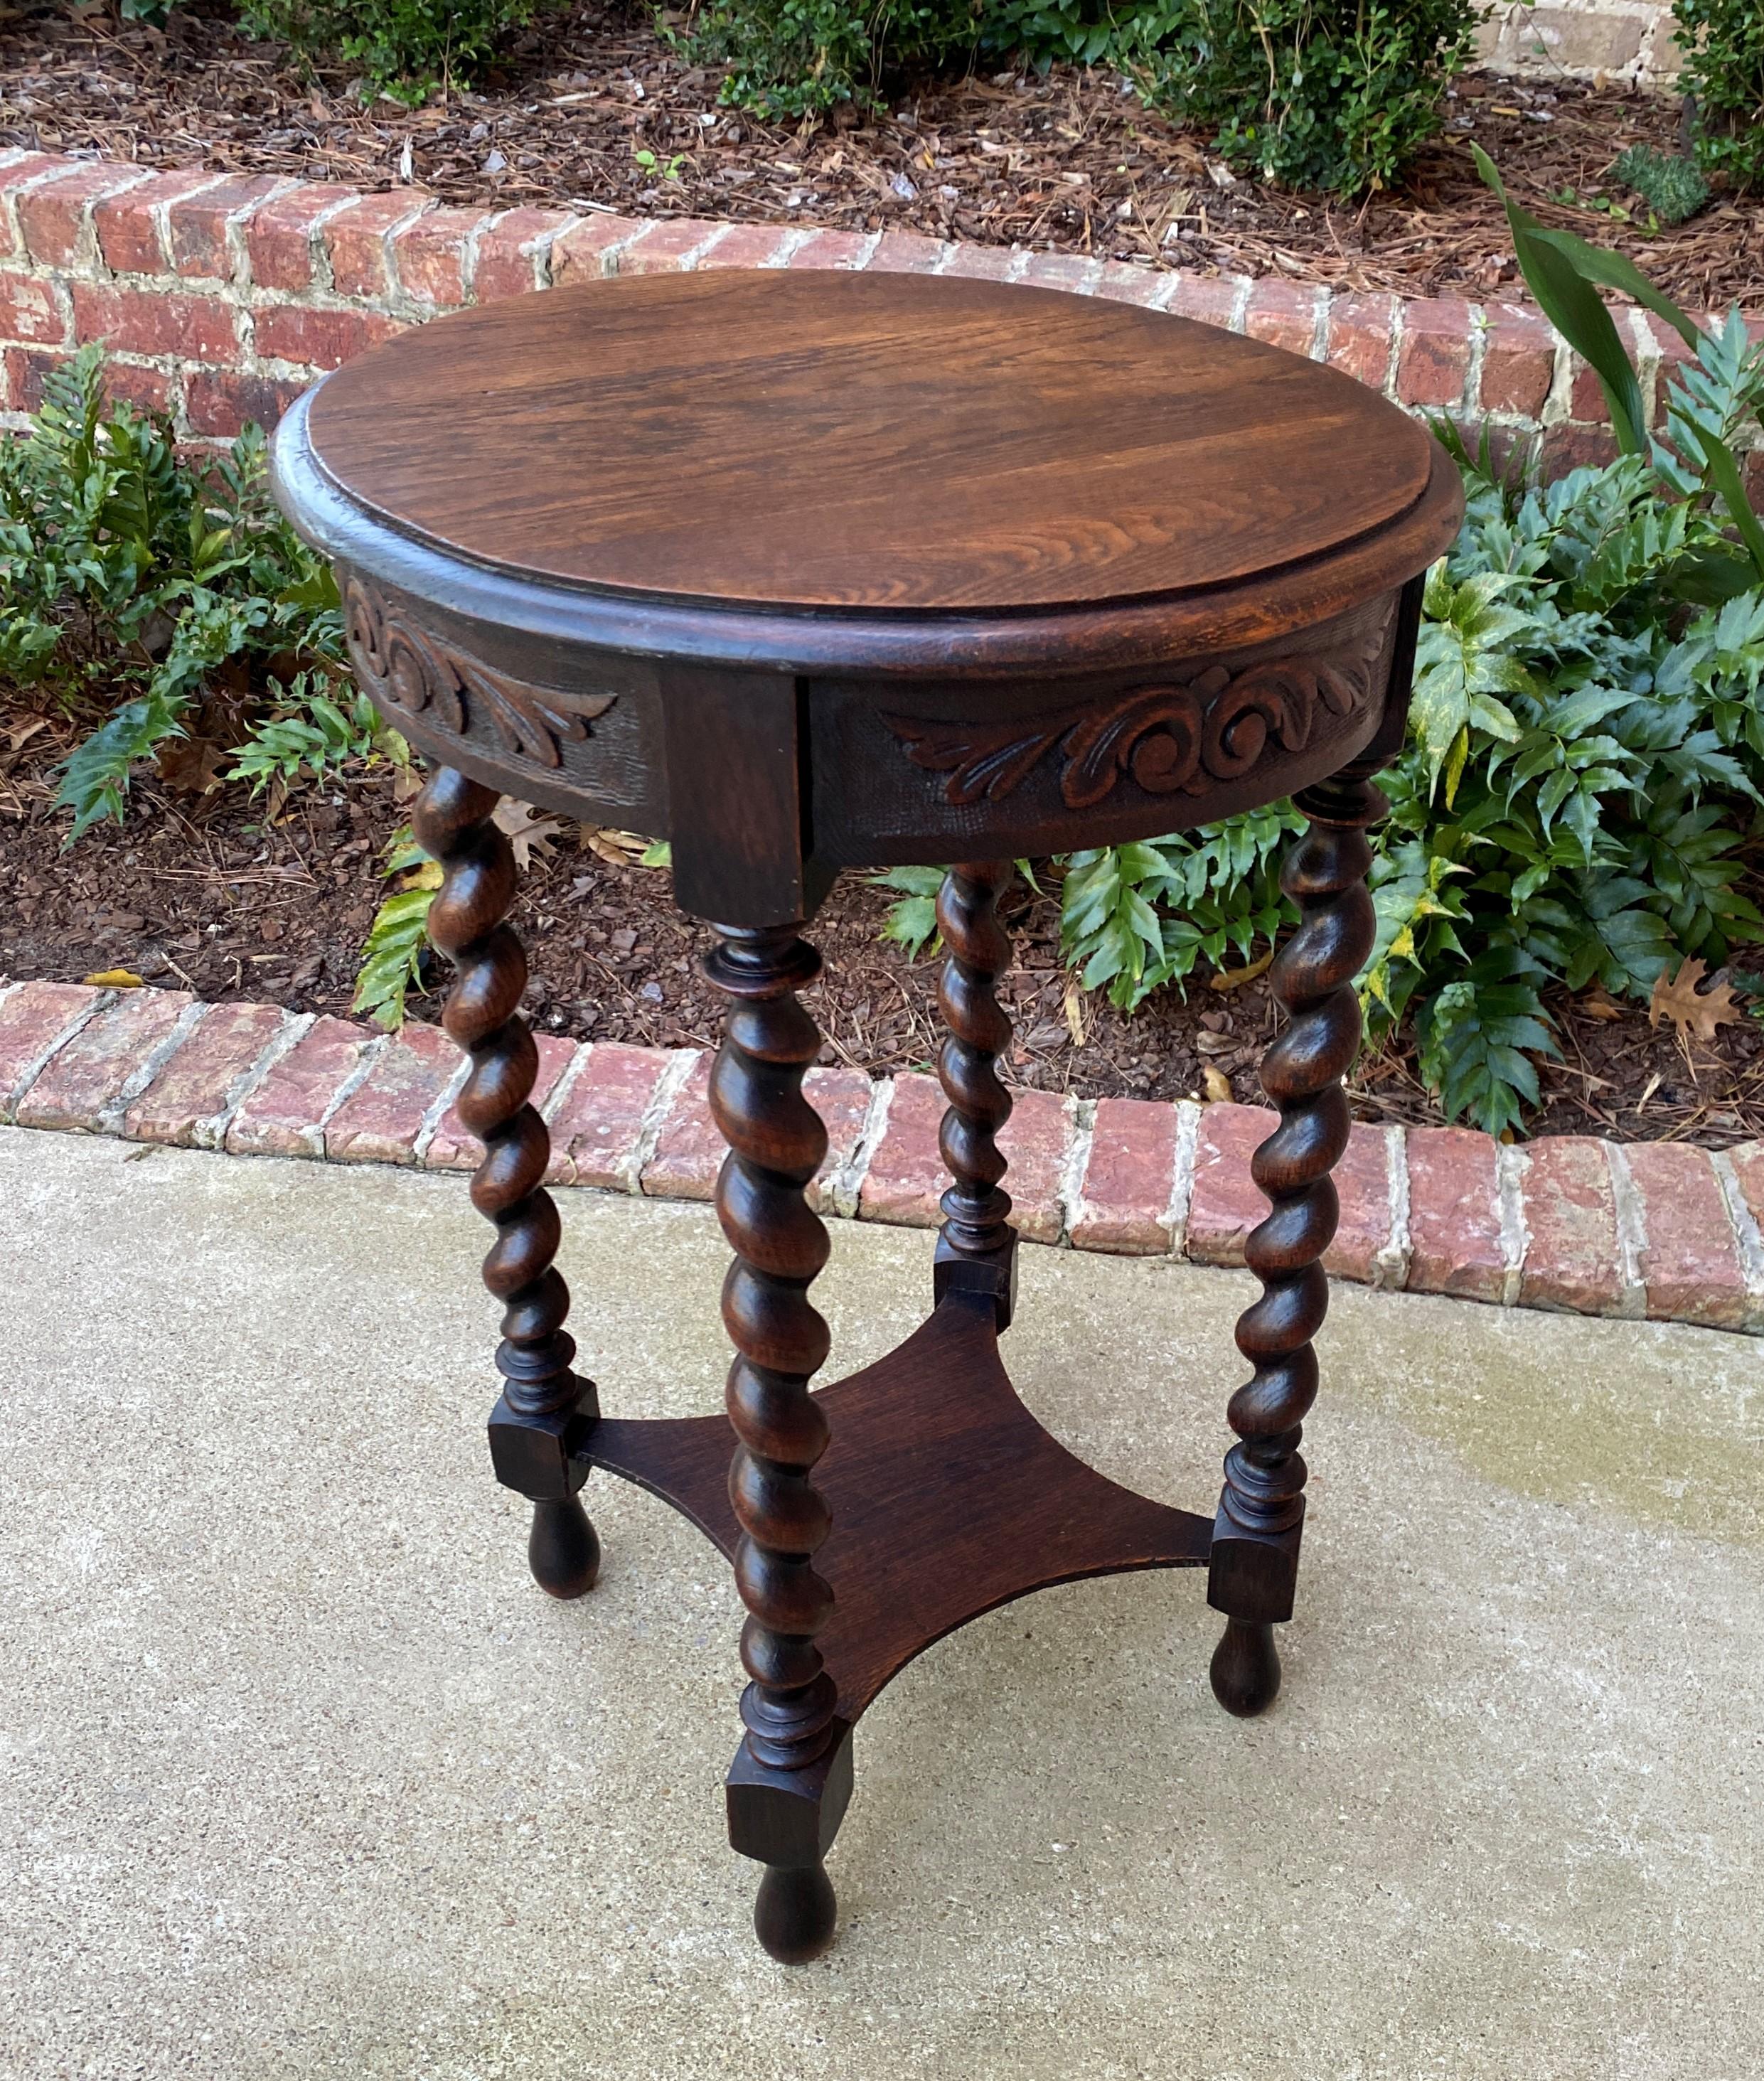 Antique English Round Table End Table Occasional Table Barley Twist Oak 2-Tier 2